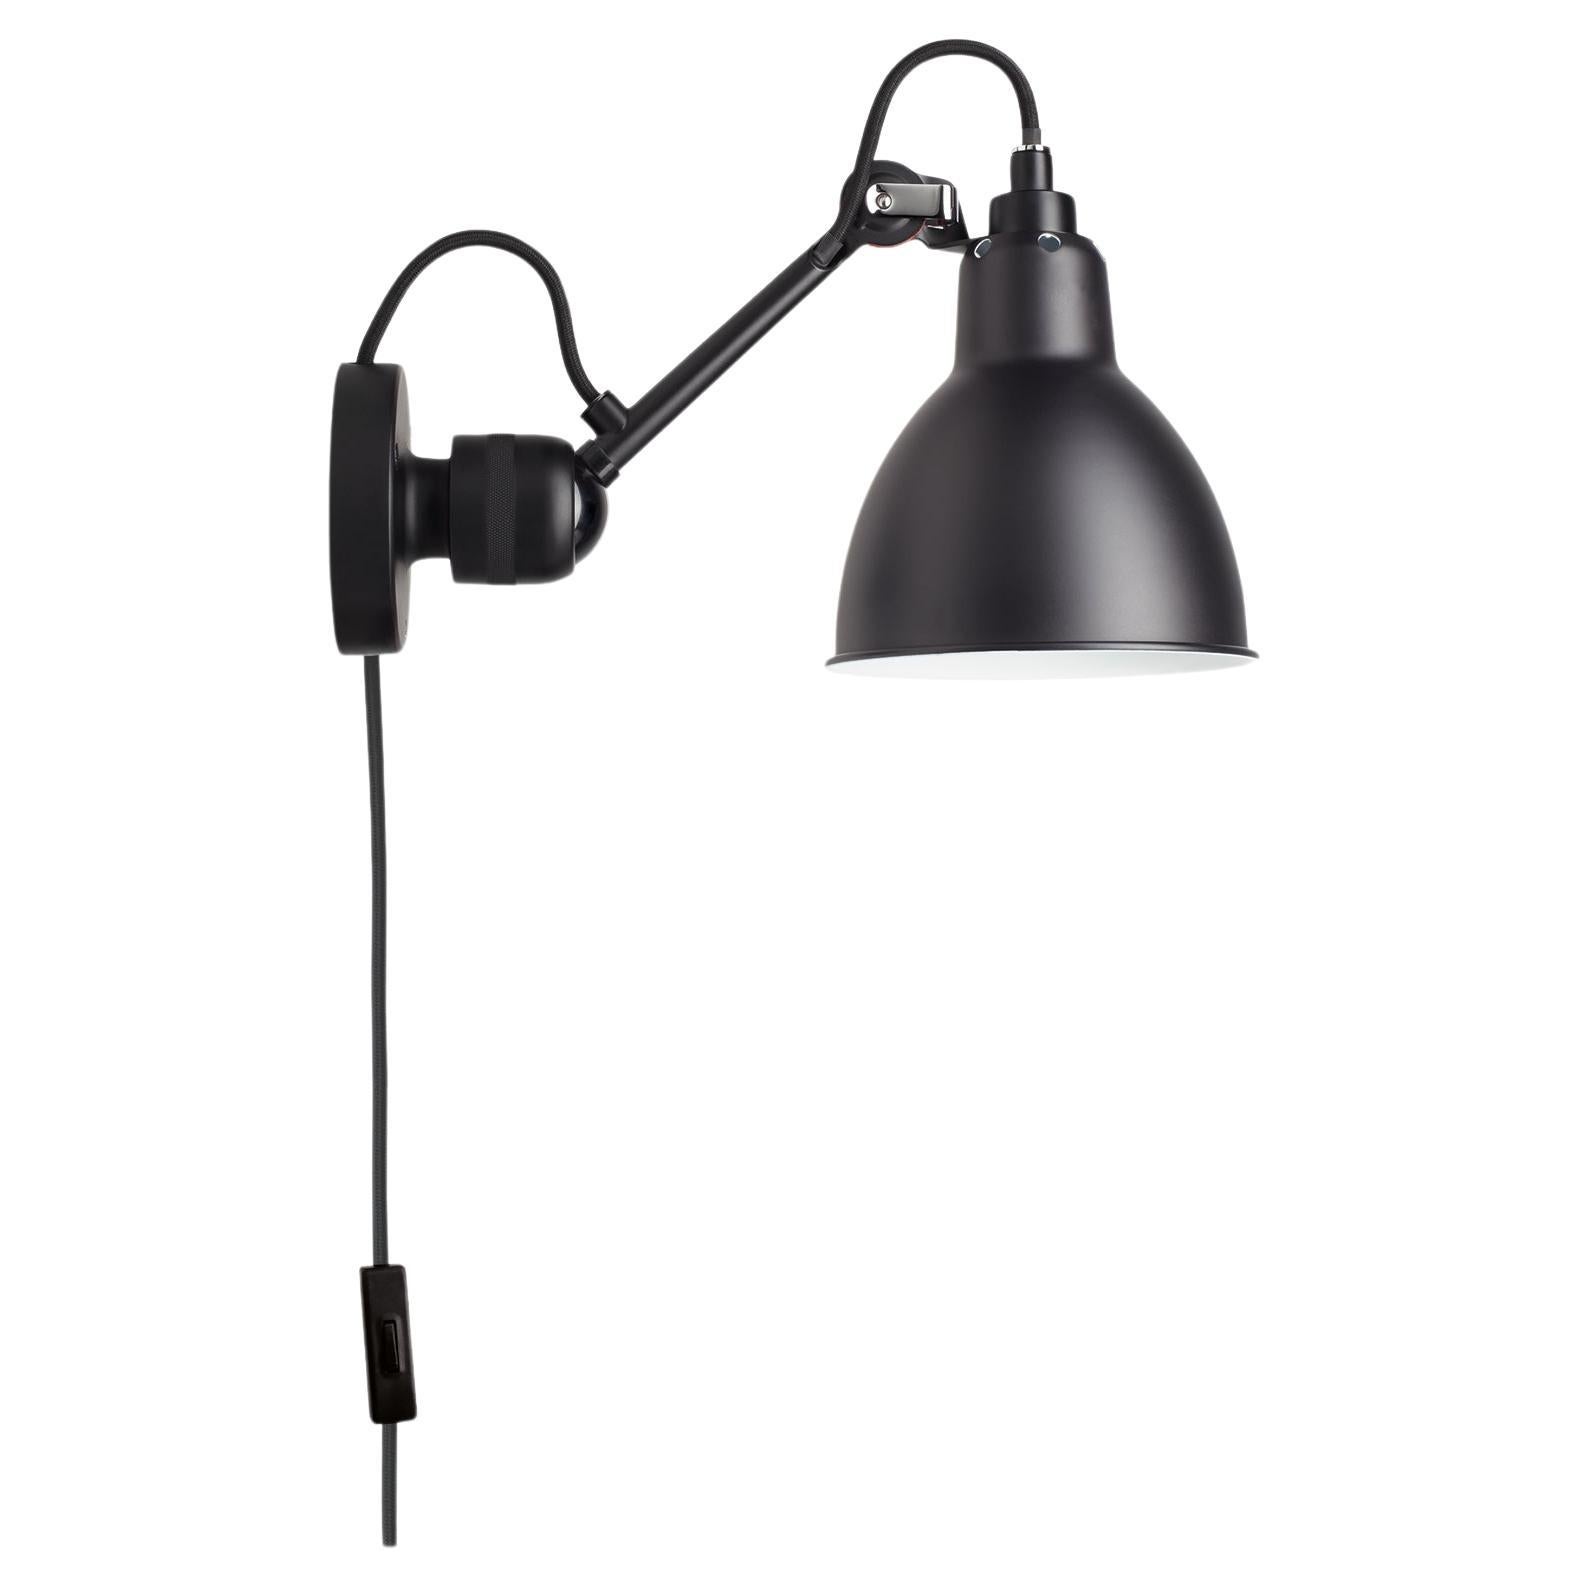 DCW Editions La Lampe Gras N°304 CA Wall Lamp in Black Arm and Black Shade For Sale